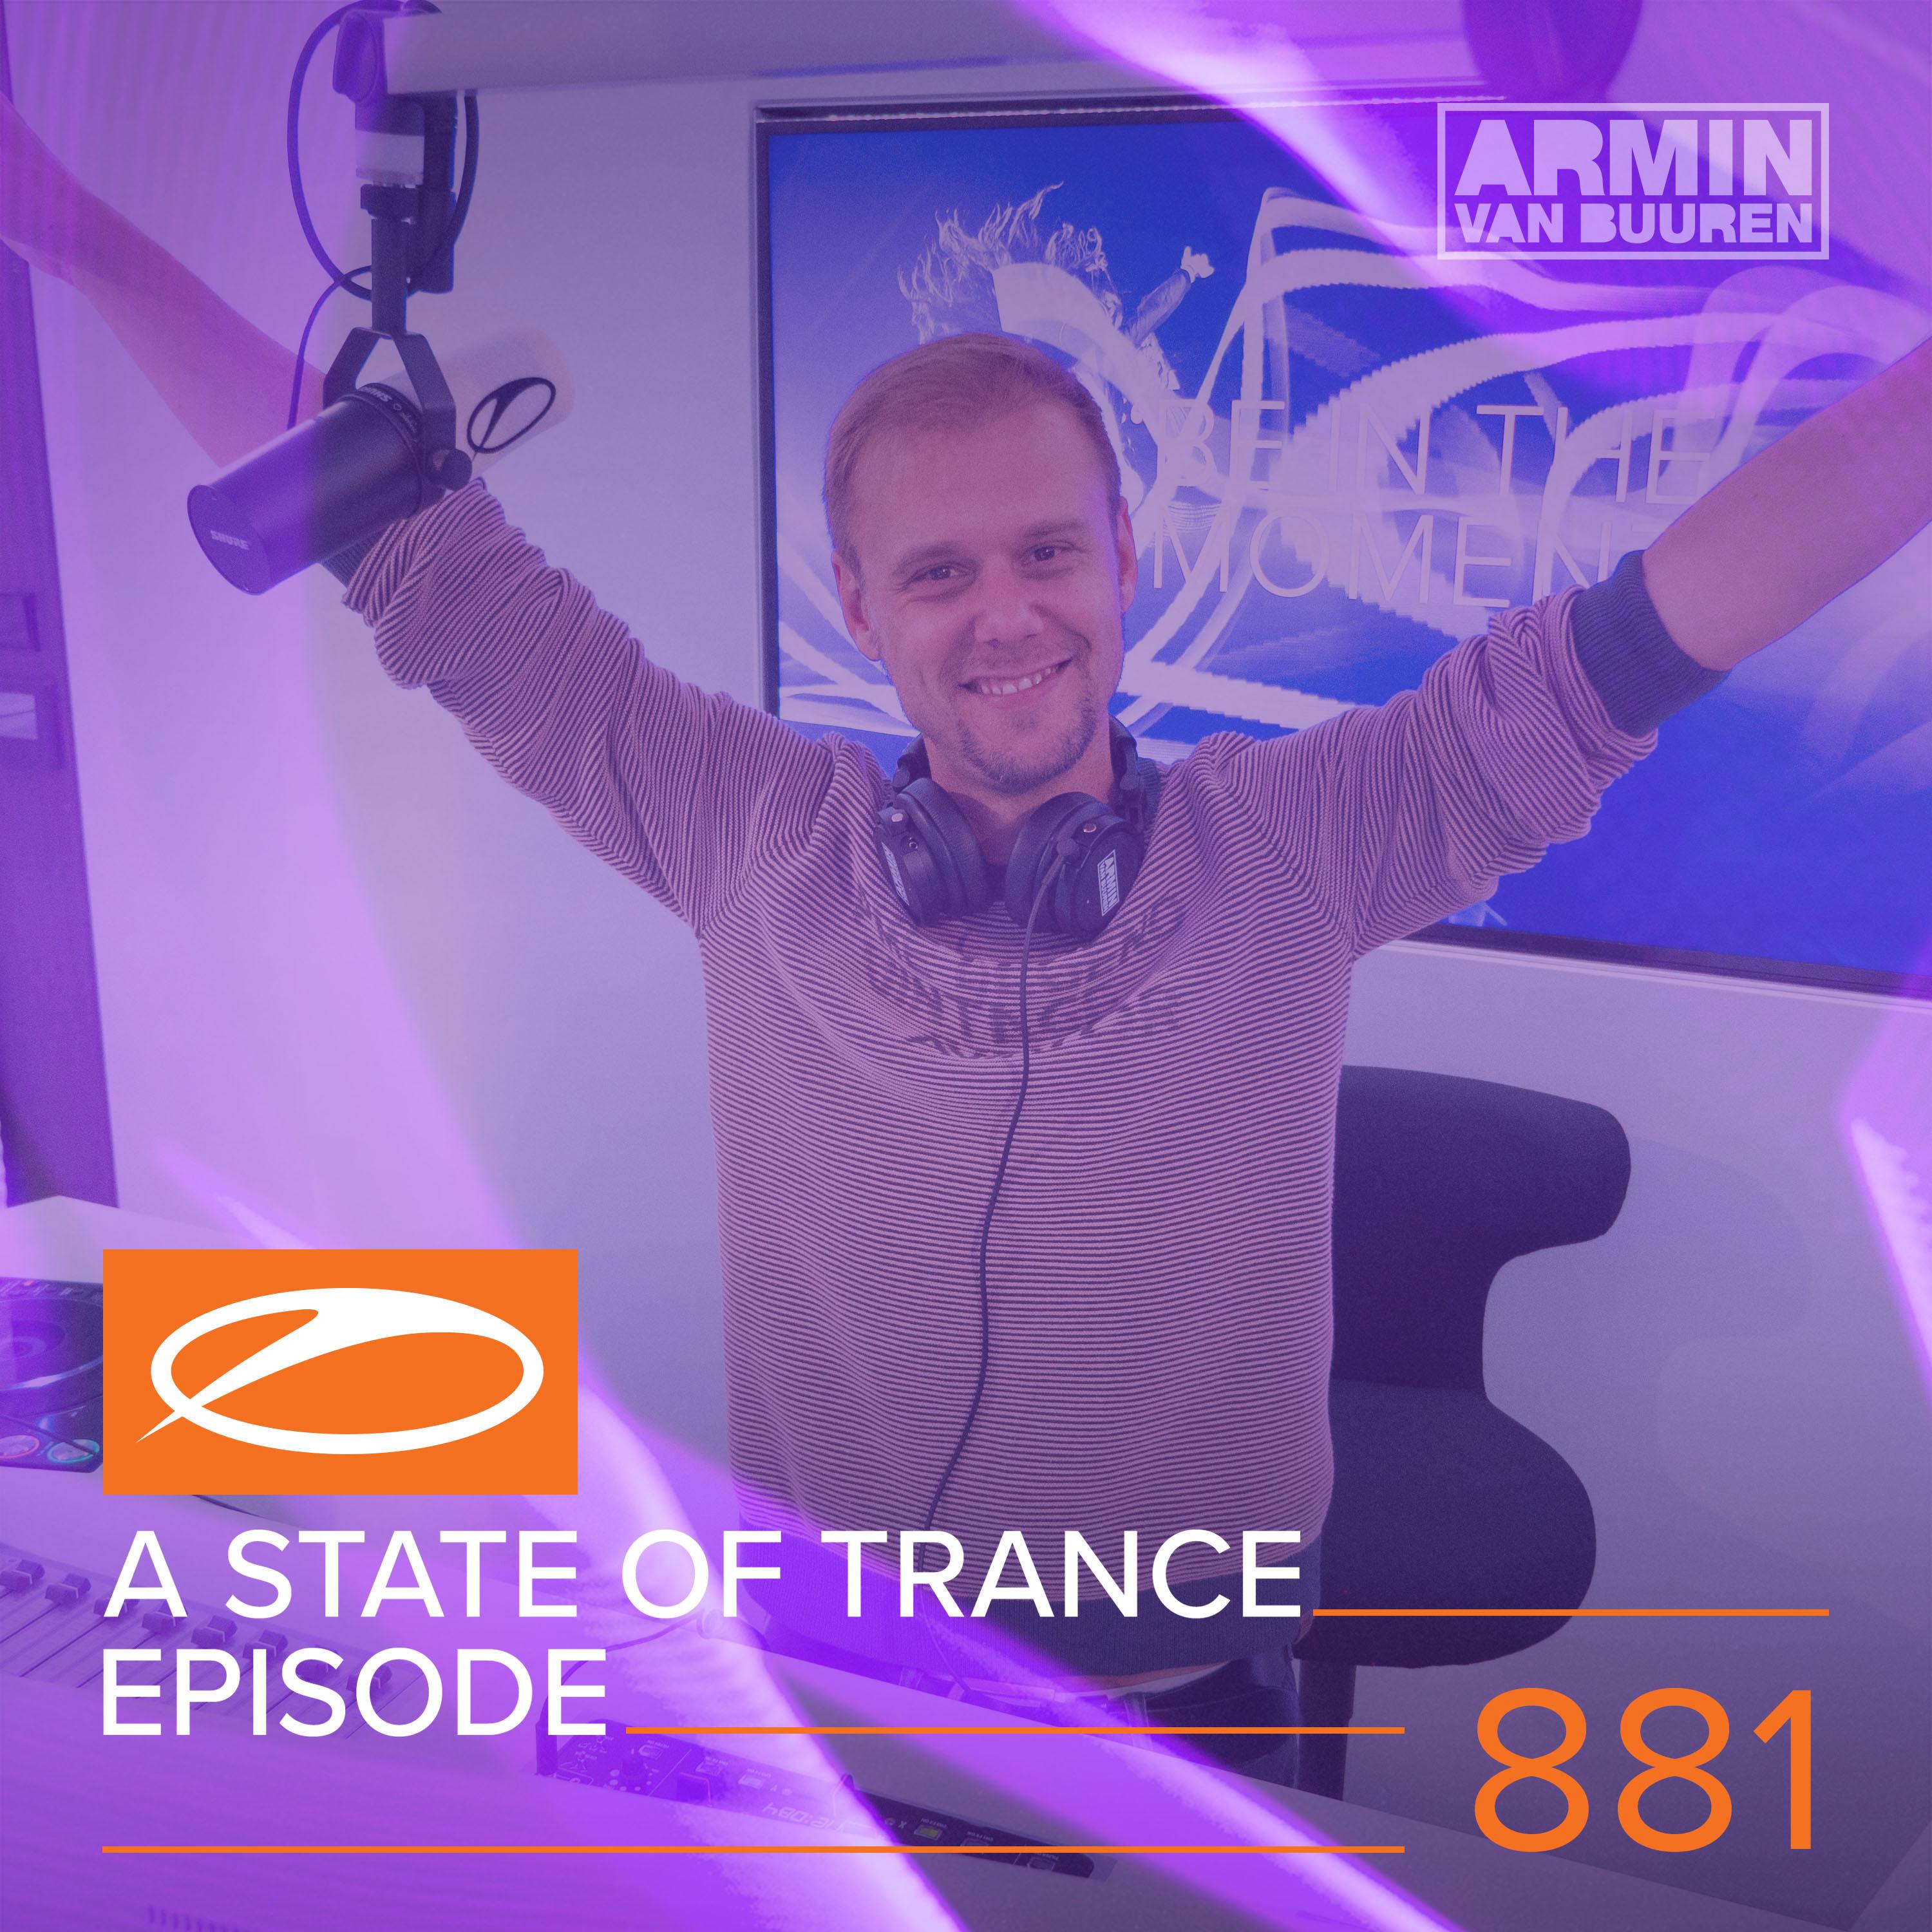 A State Of Trance (ASOT 881) (This Week's Service For Dreamers, Pt. 6)